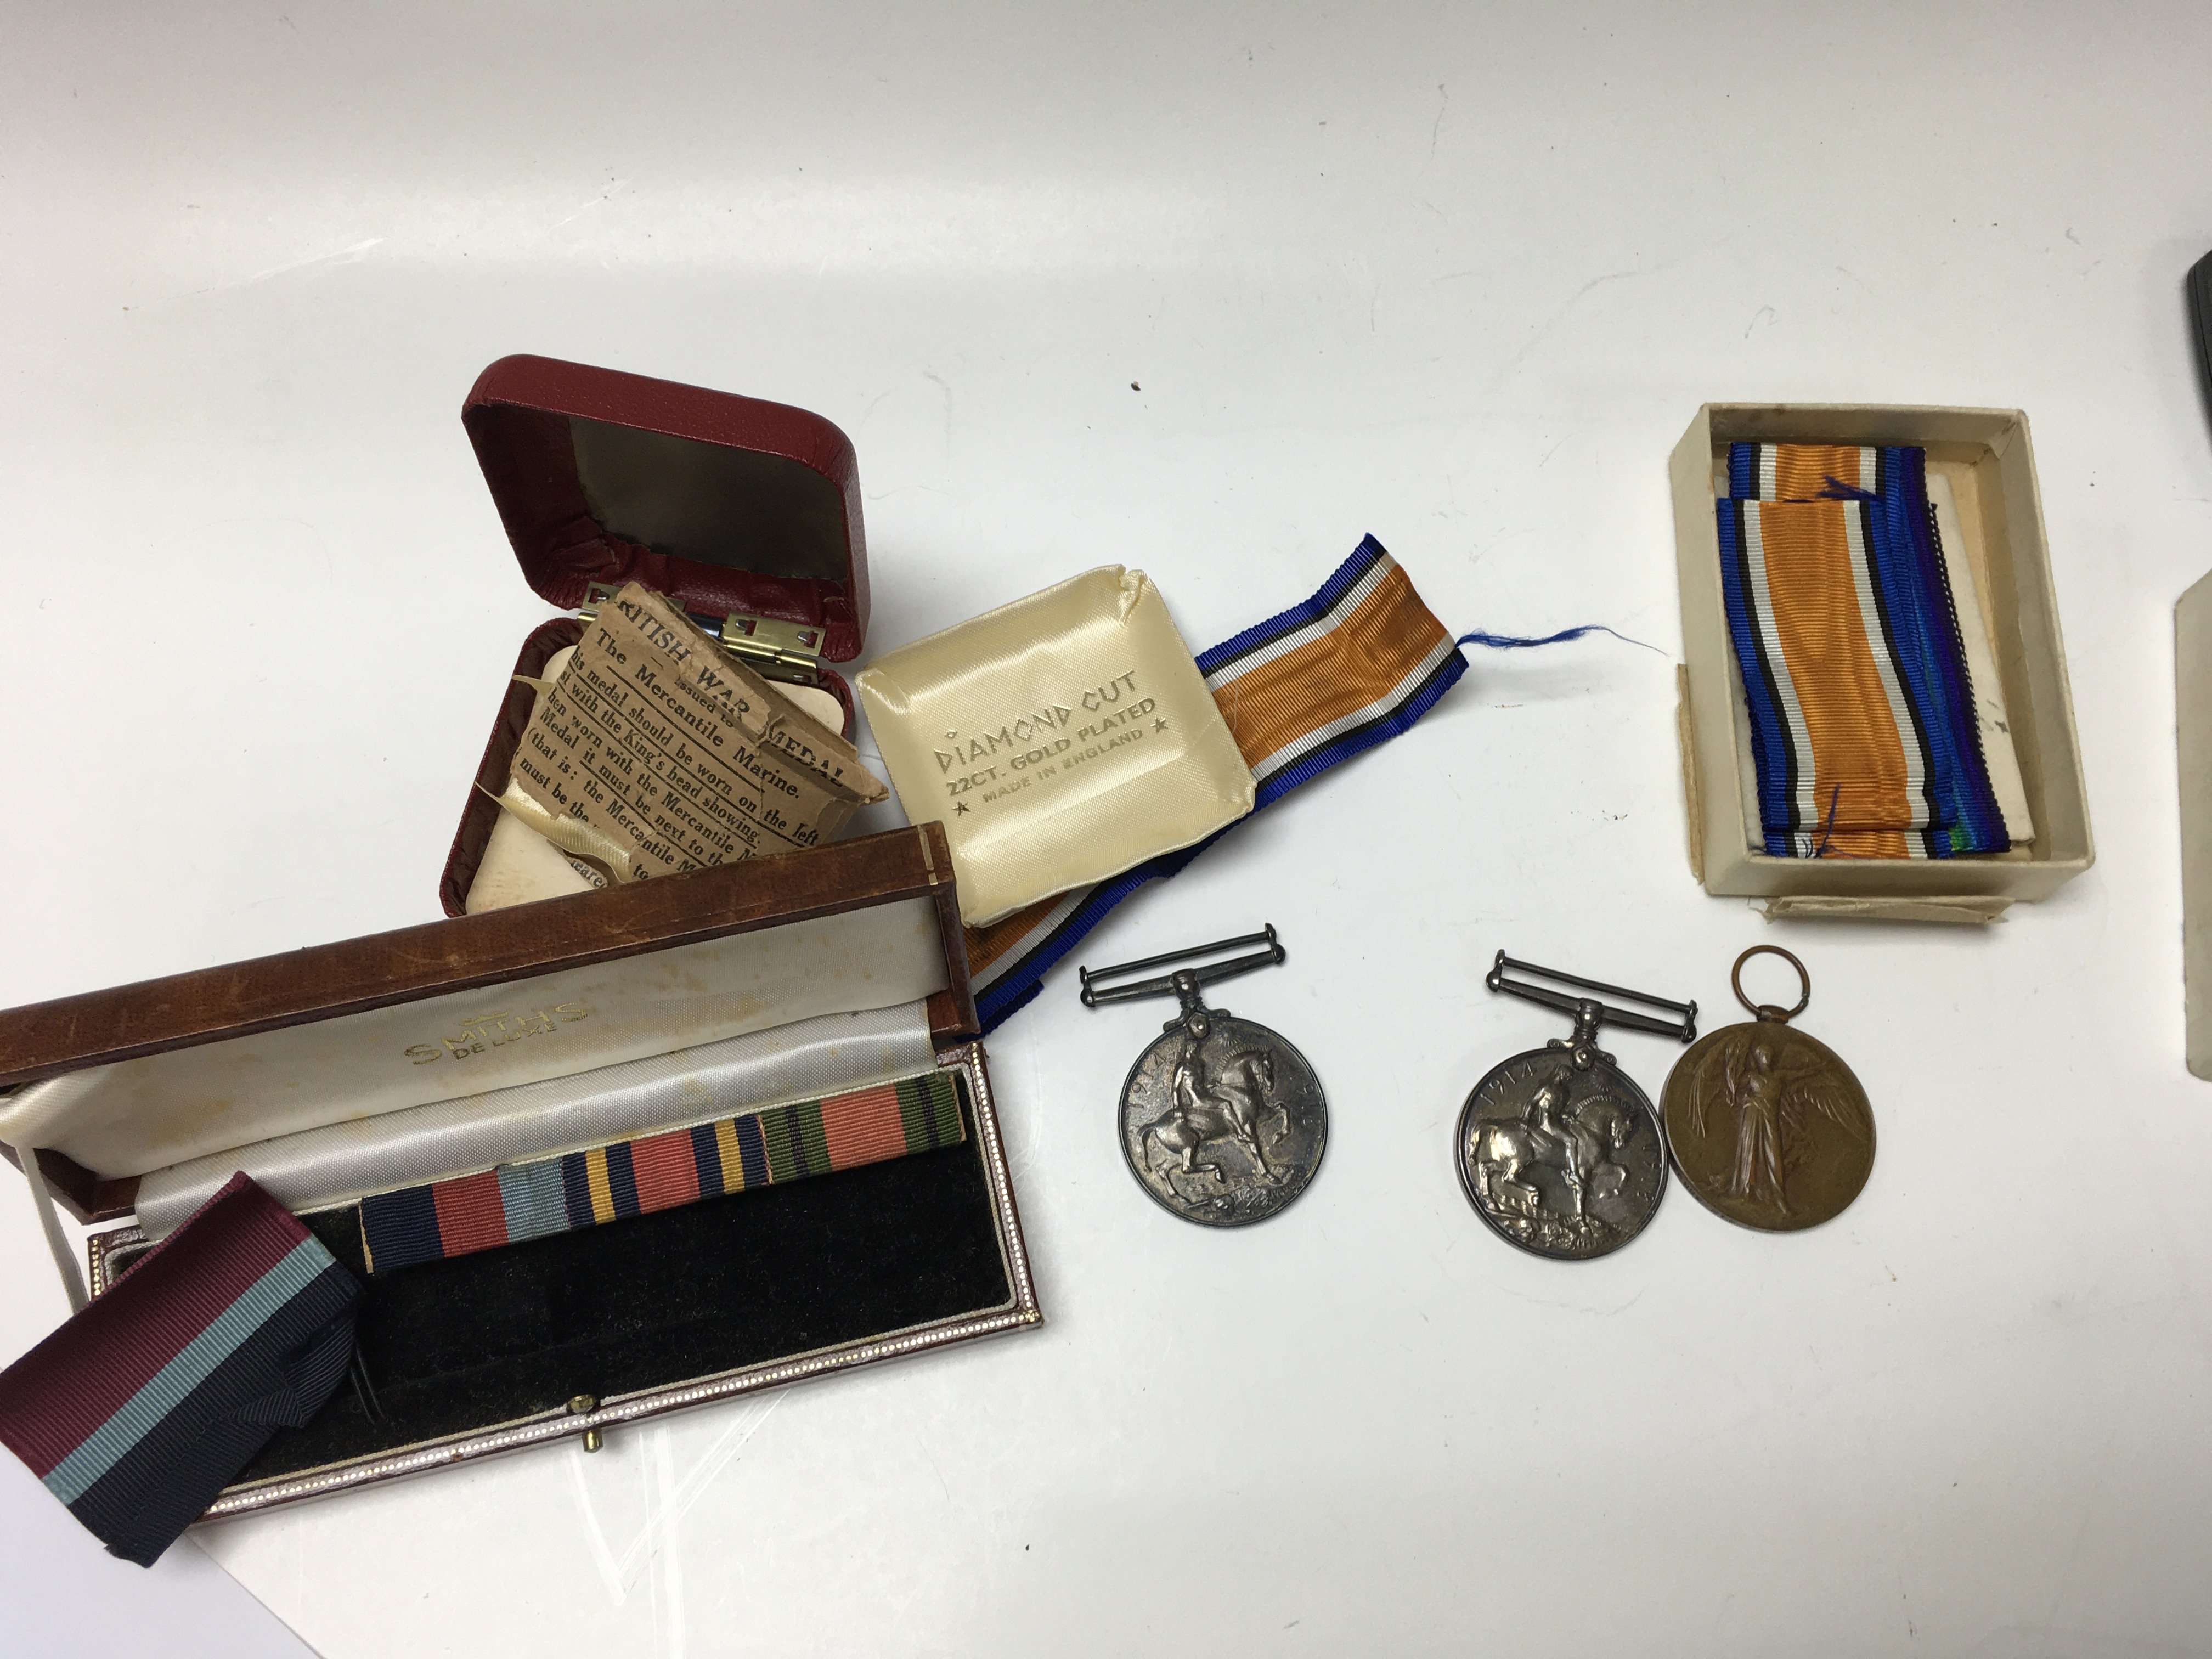 Three First World War medal, one medal awarded to